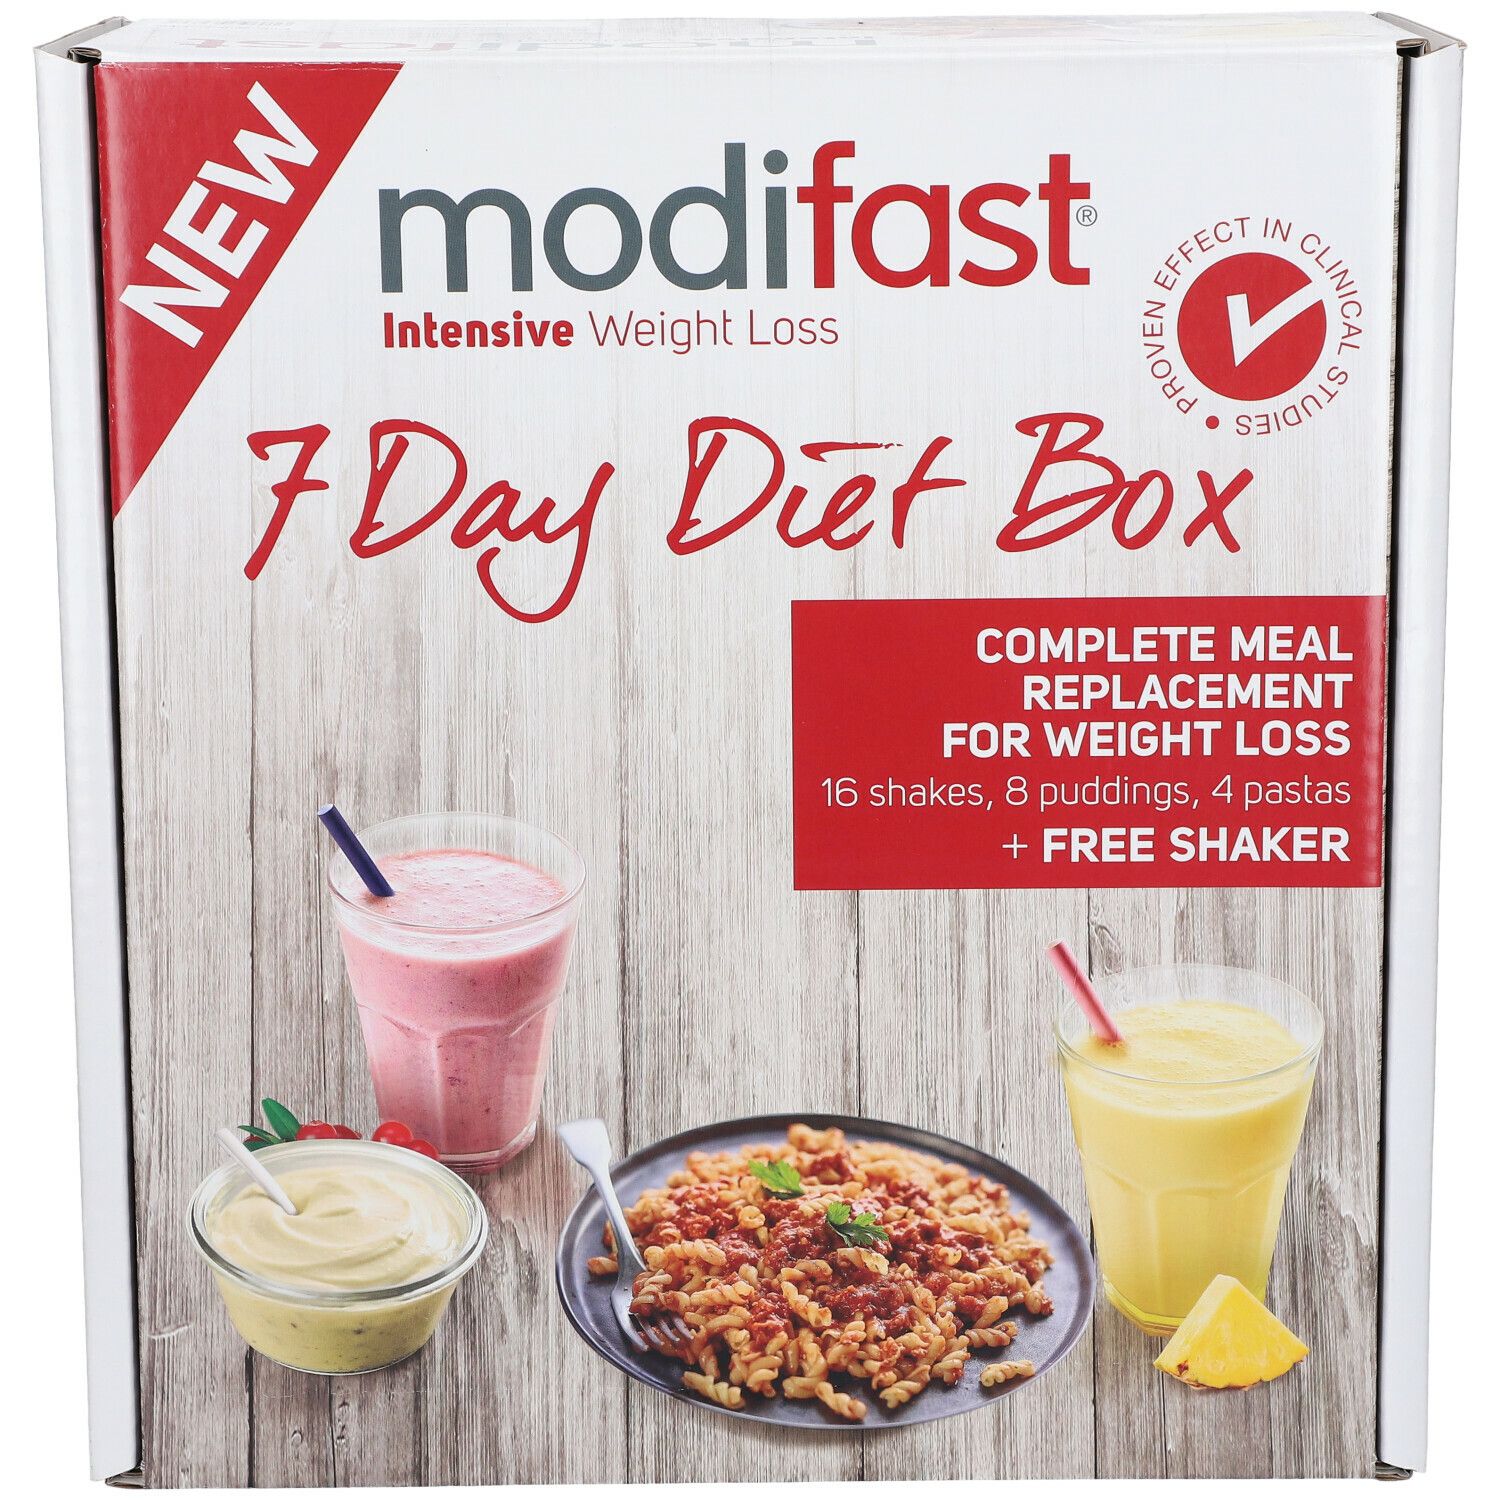 modifast® Intensive Weight Loss 7 Day